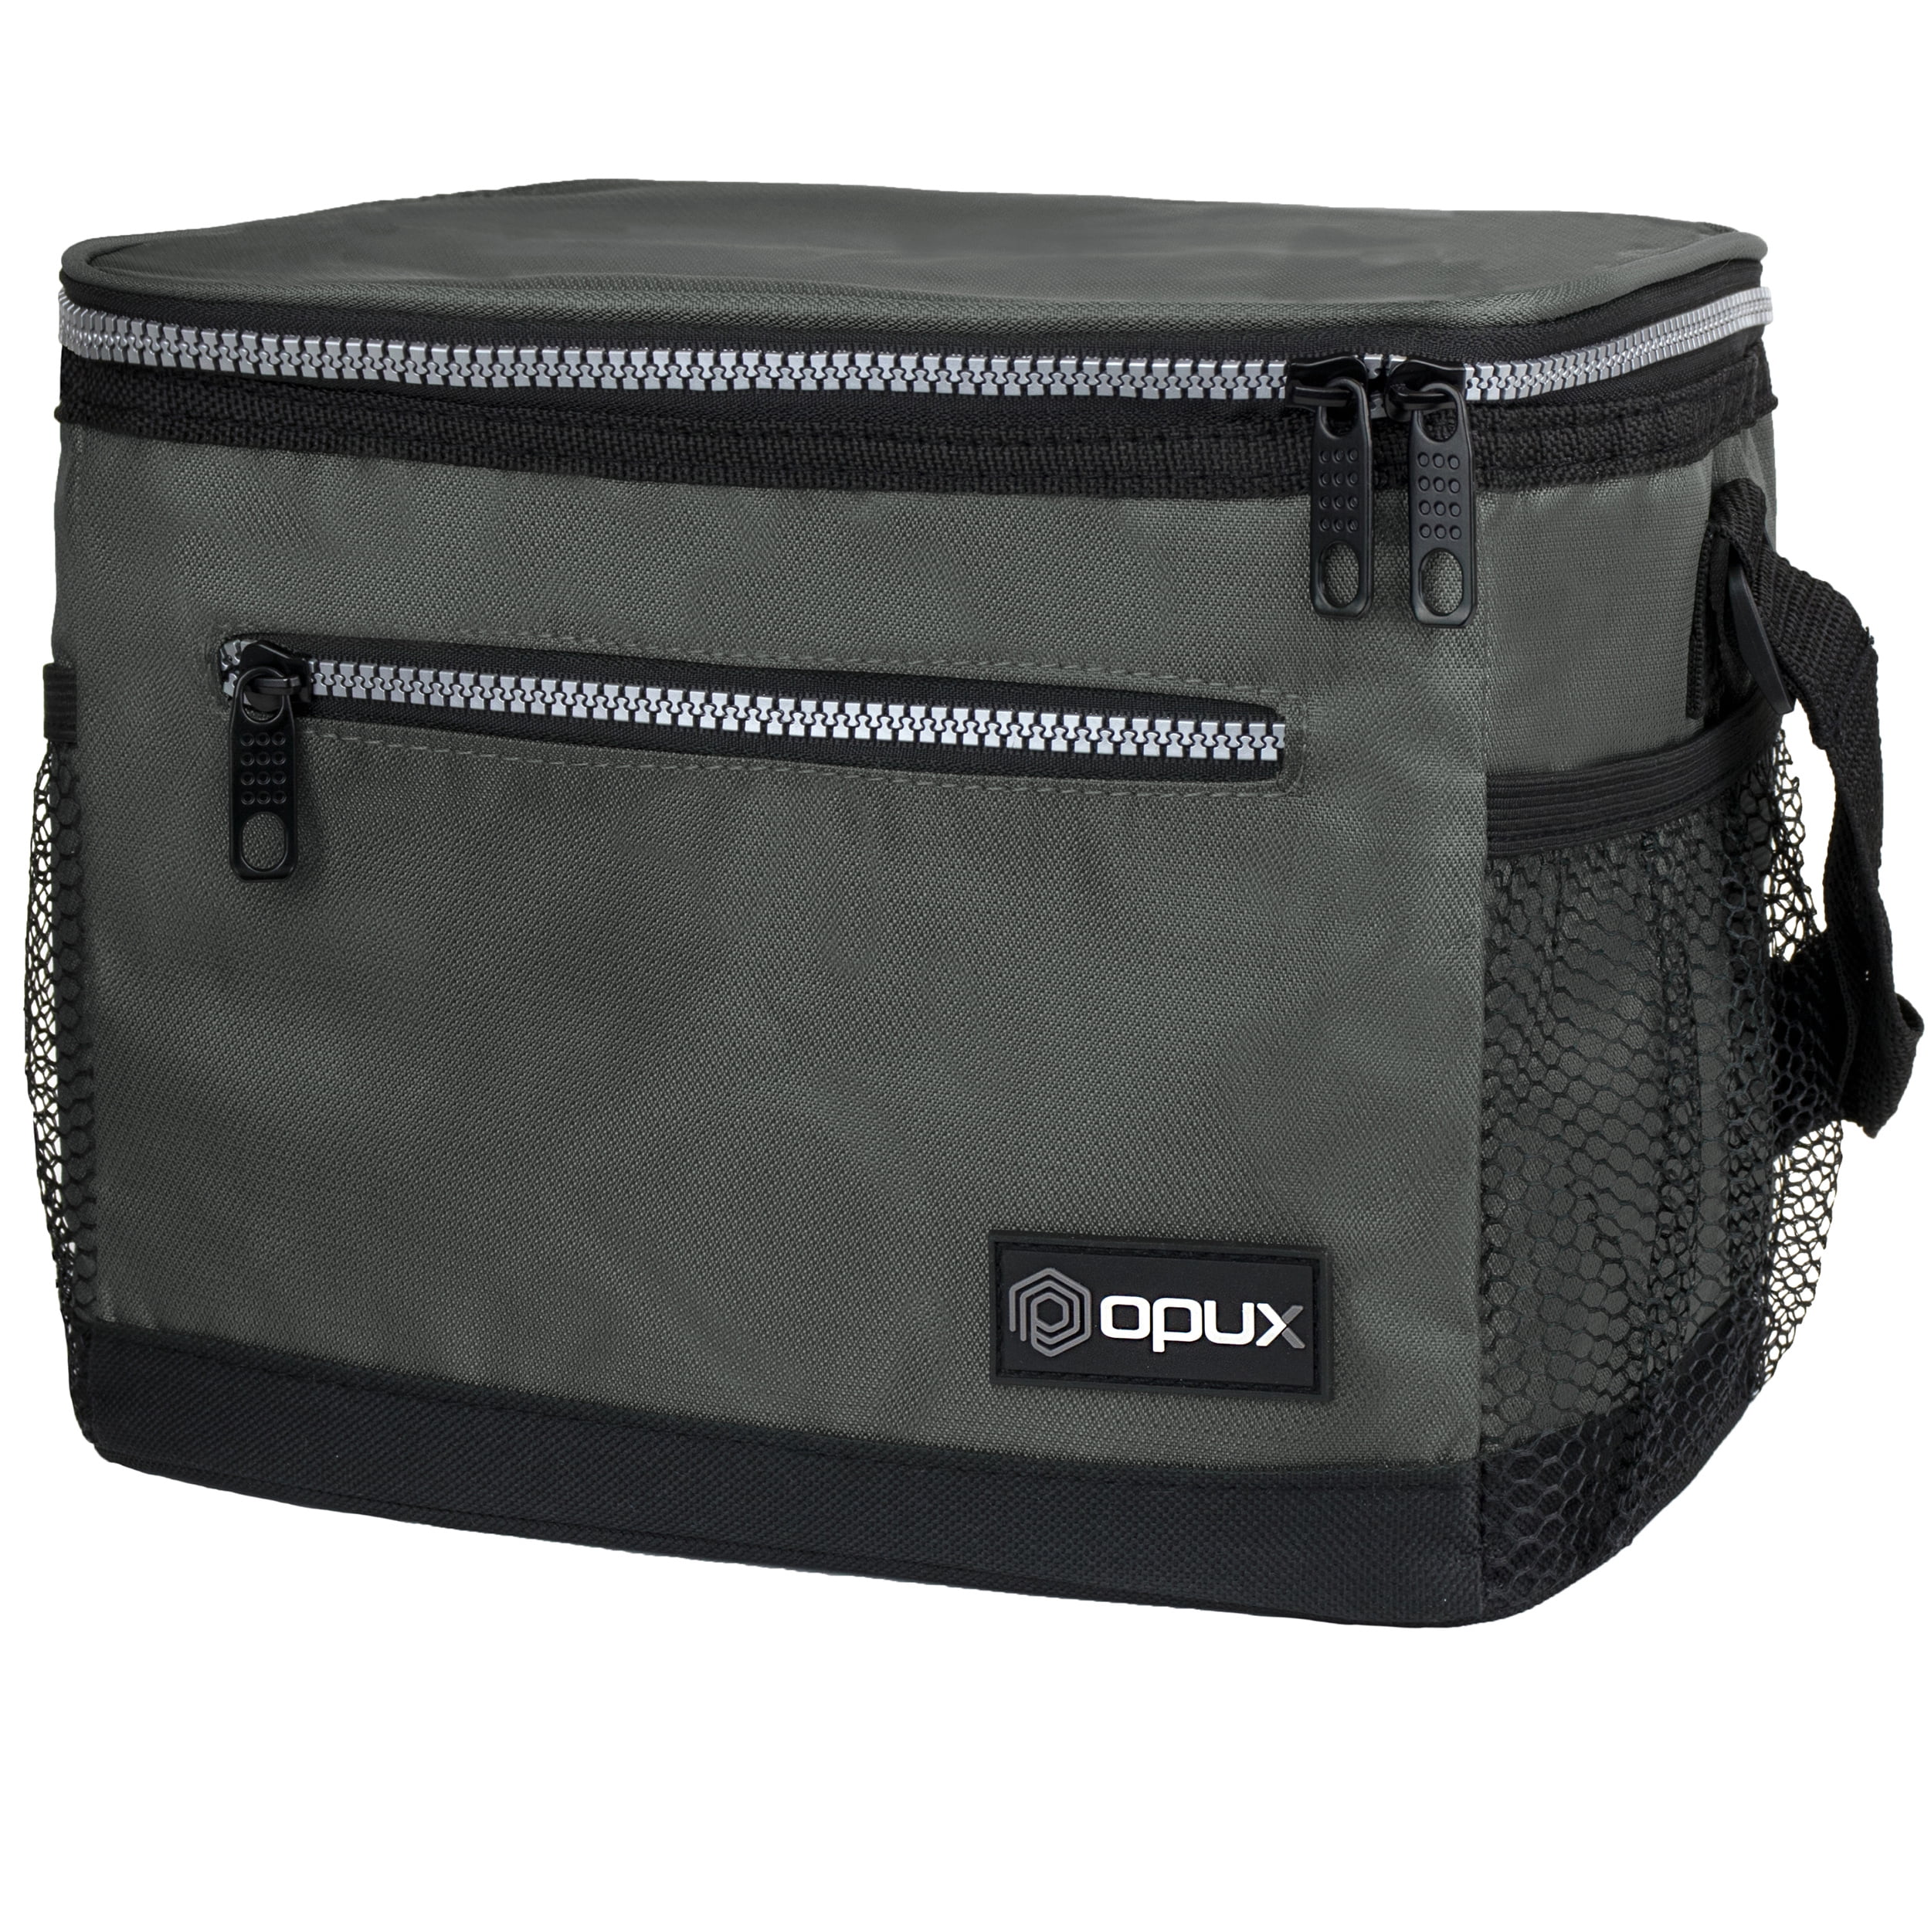 Men OPUX Premium Insulated Lunch Bag for Women Heather Charcoal Grey Adults Medium Lunch Cooler for School Fits 6 Cans Soft Leakproof Liner Pocket Work Lunch Box with Shoulder Strap 